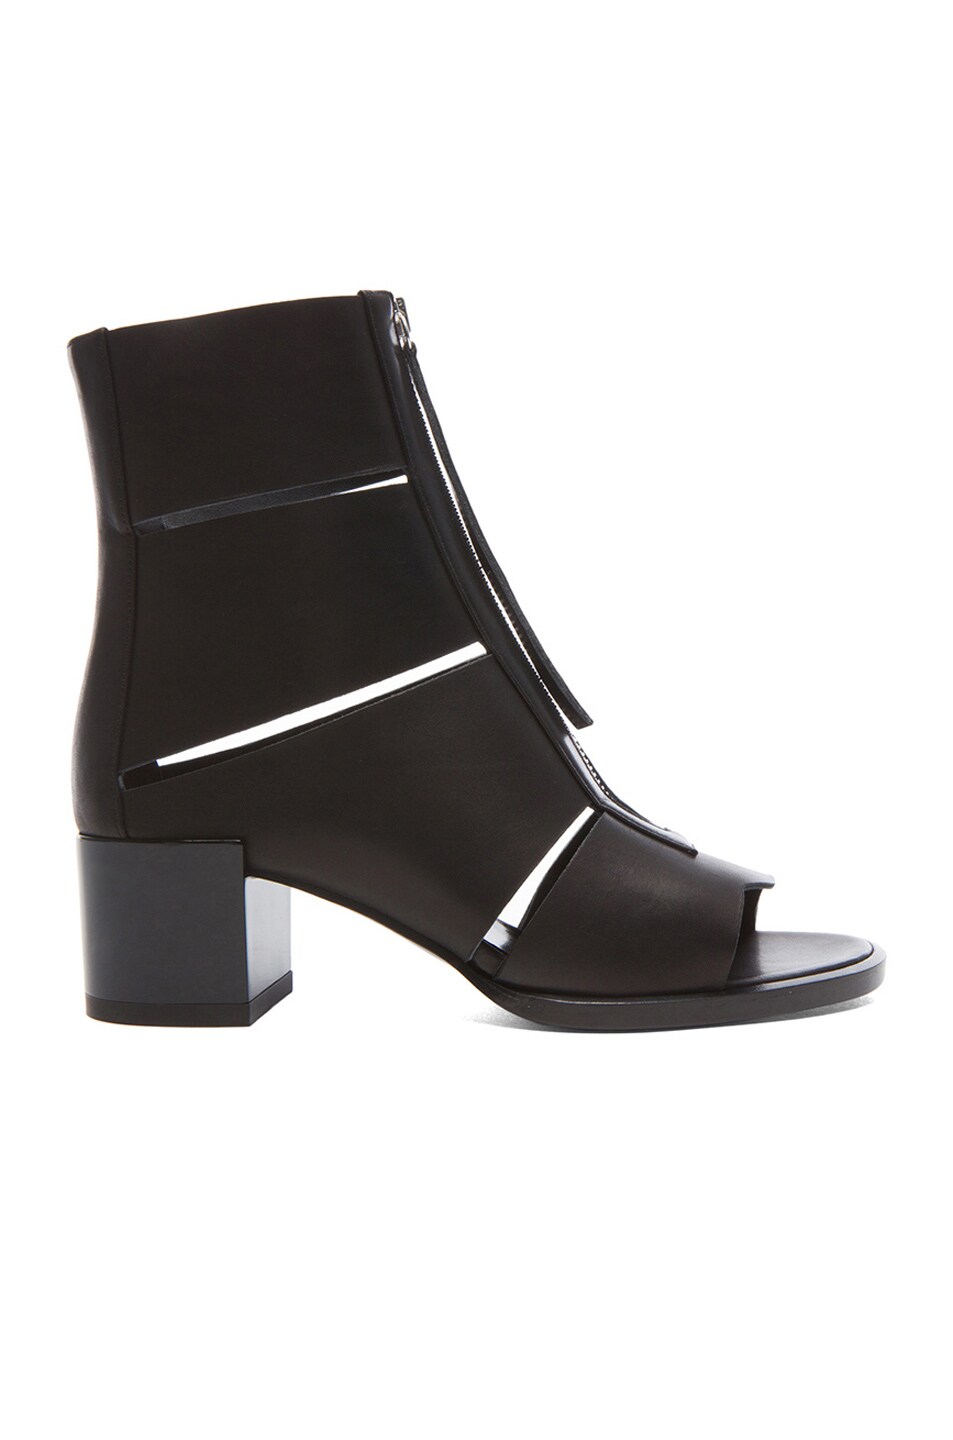 Image 1 of Pierre Hardy Cut Out Calfskin Leather Ankle Booties in Black